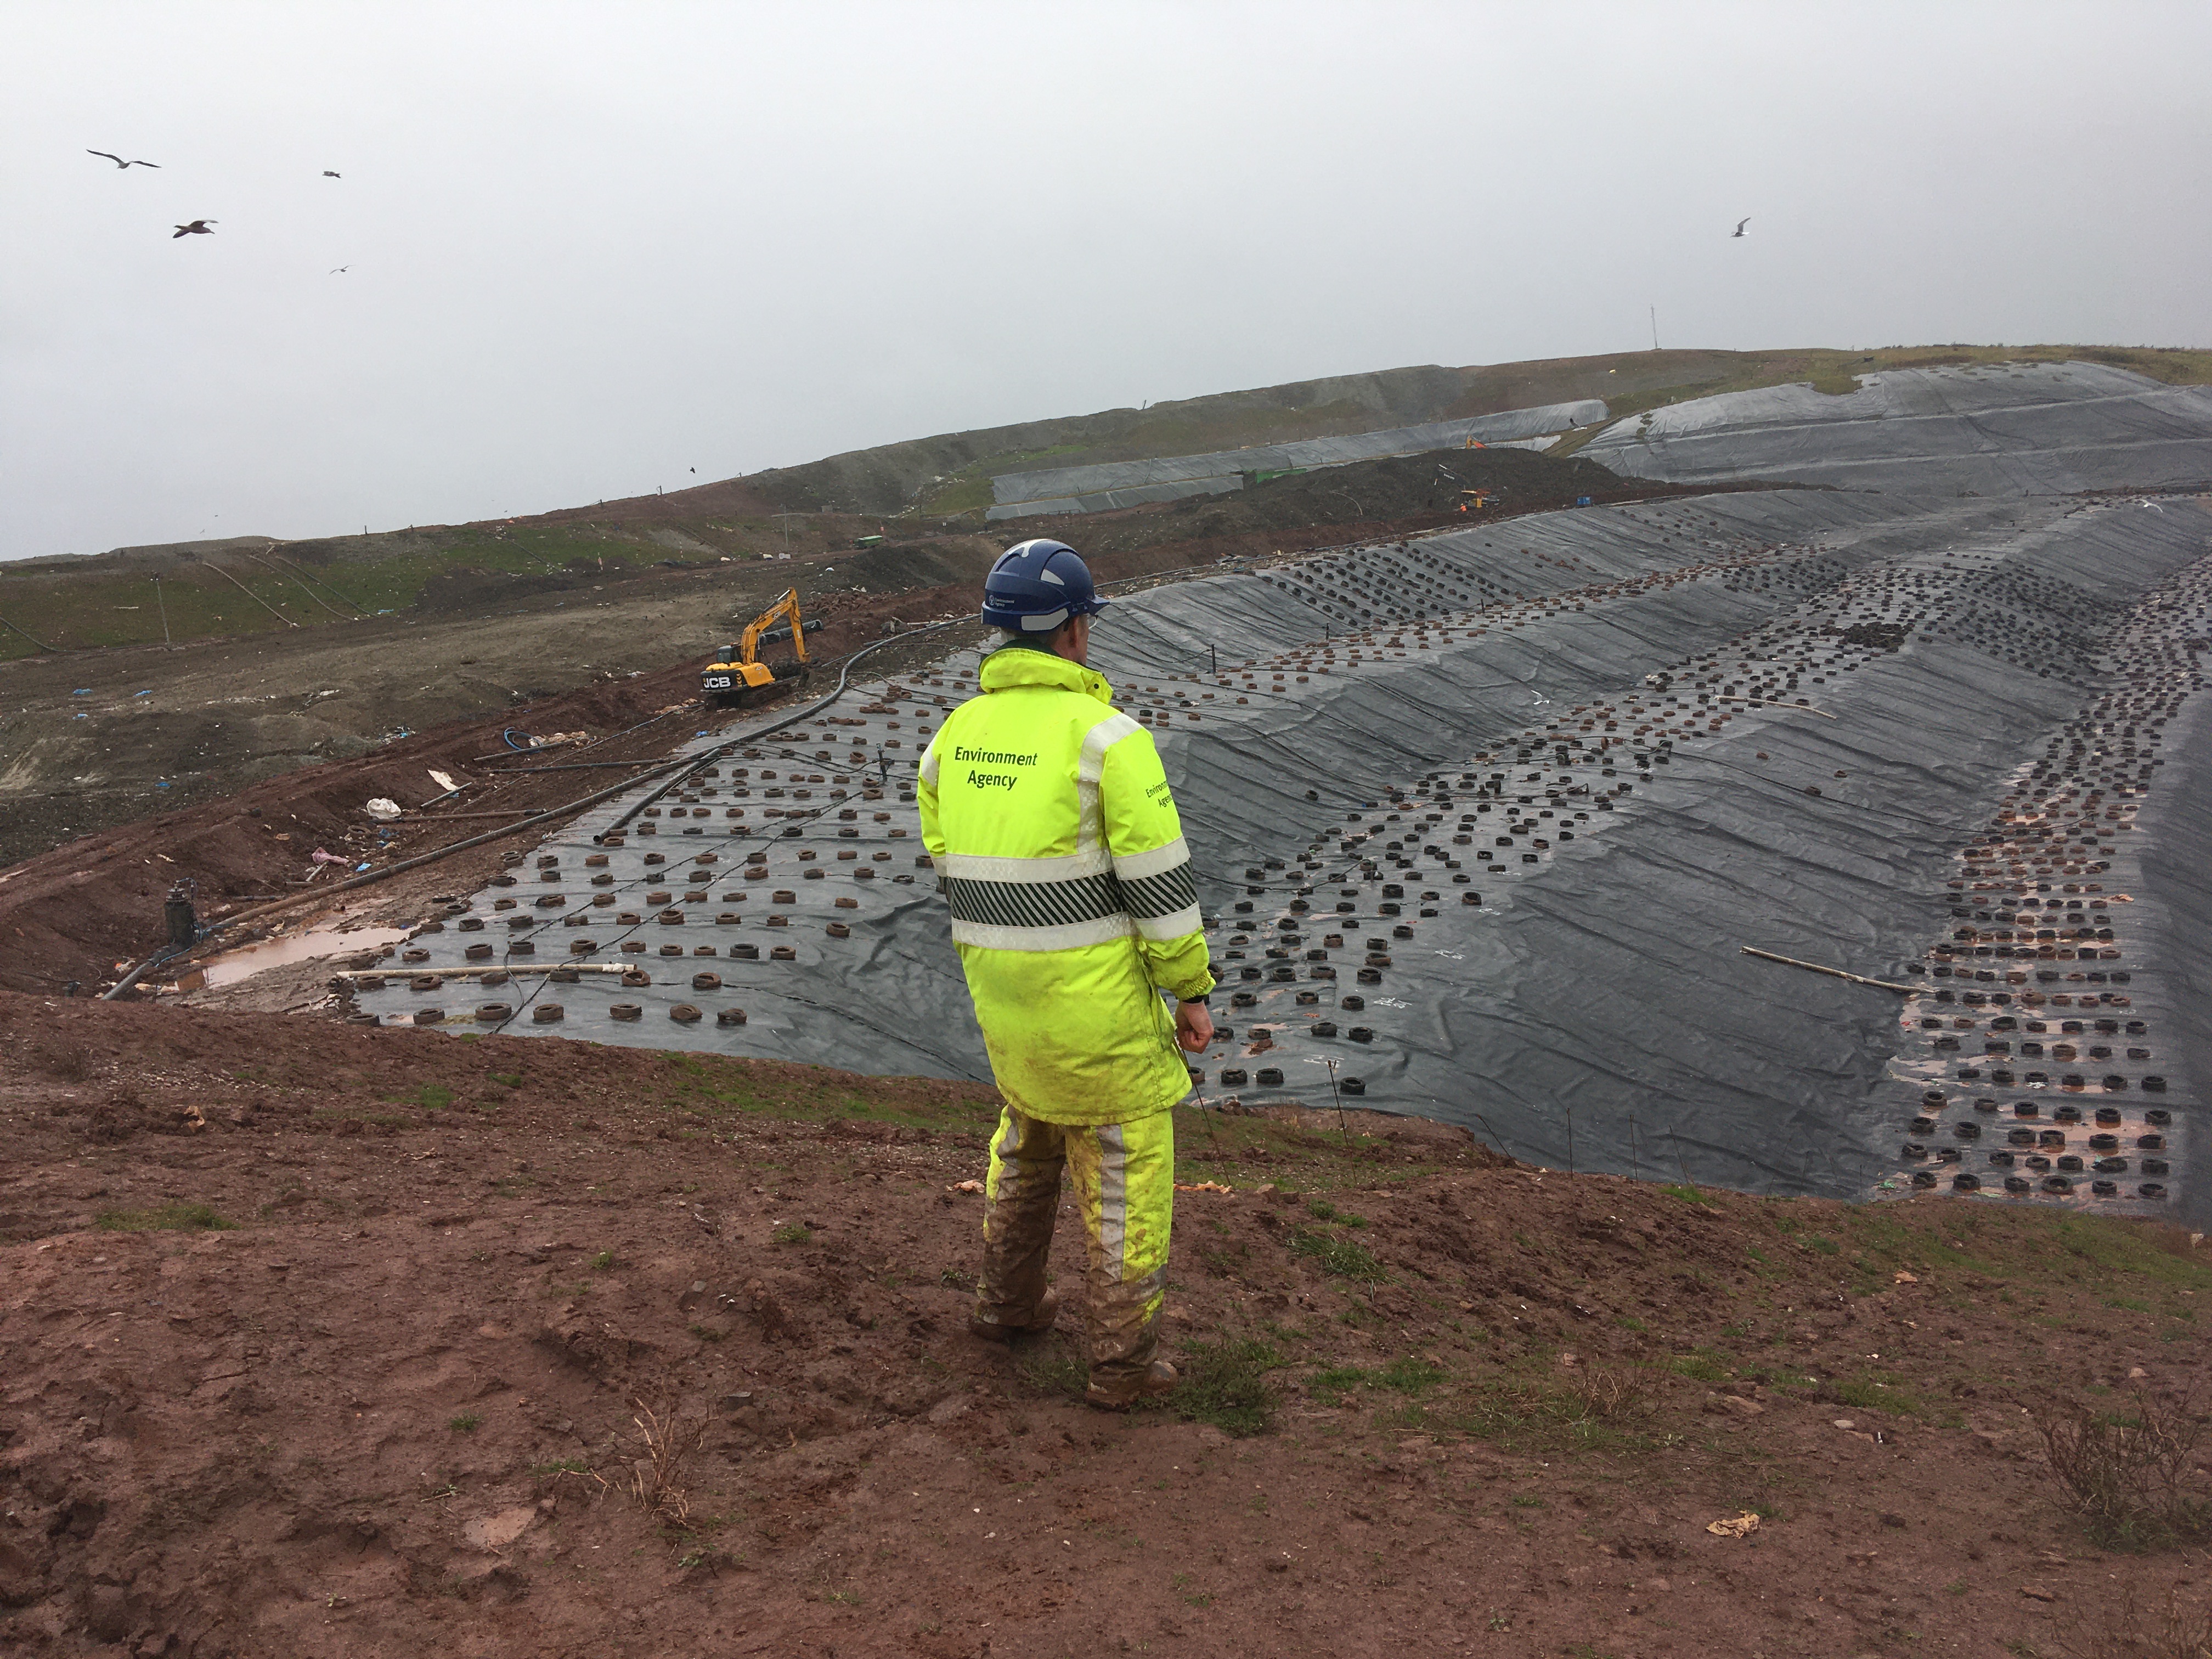 Photograph showing an Environment Agency Officer inspecting the temporary capping work on the slopes of the active tipping area.